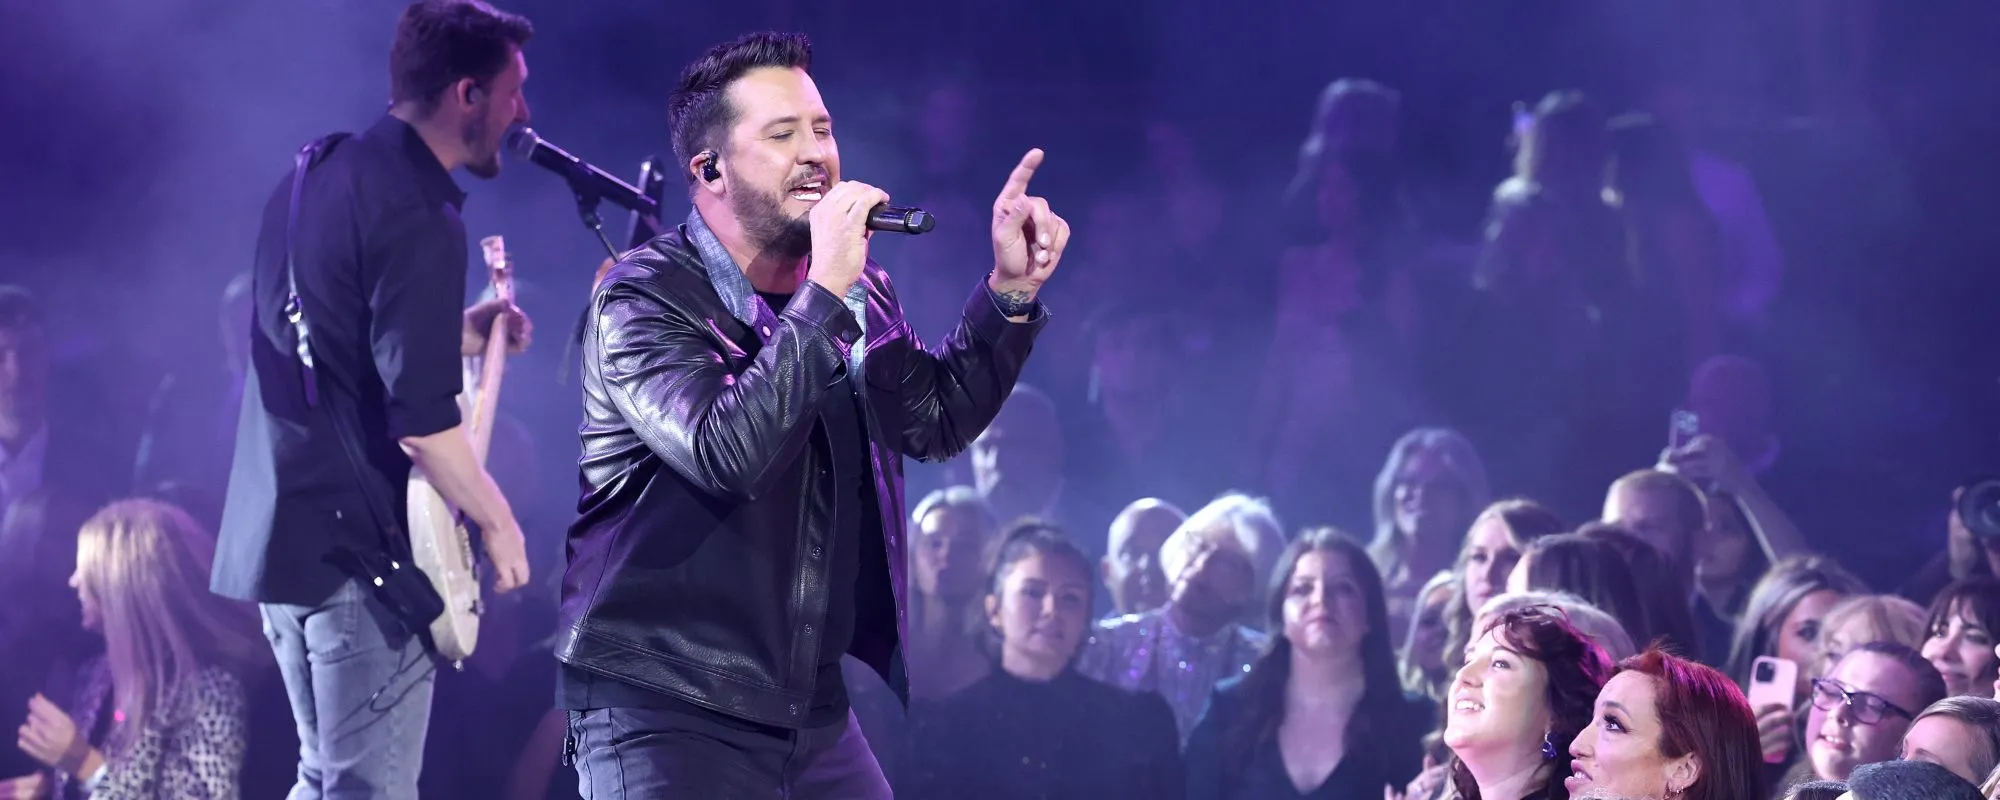 “A Thorn in My Side Again”: Luke Bryan Takes a Visit to Katy Perry’s Hometown